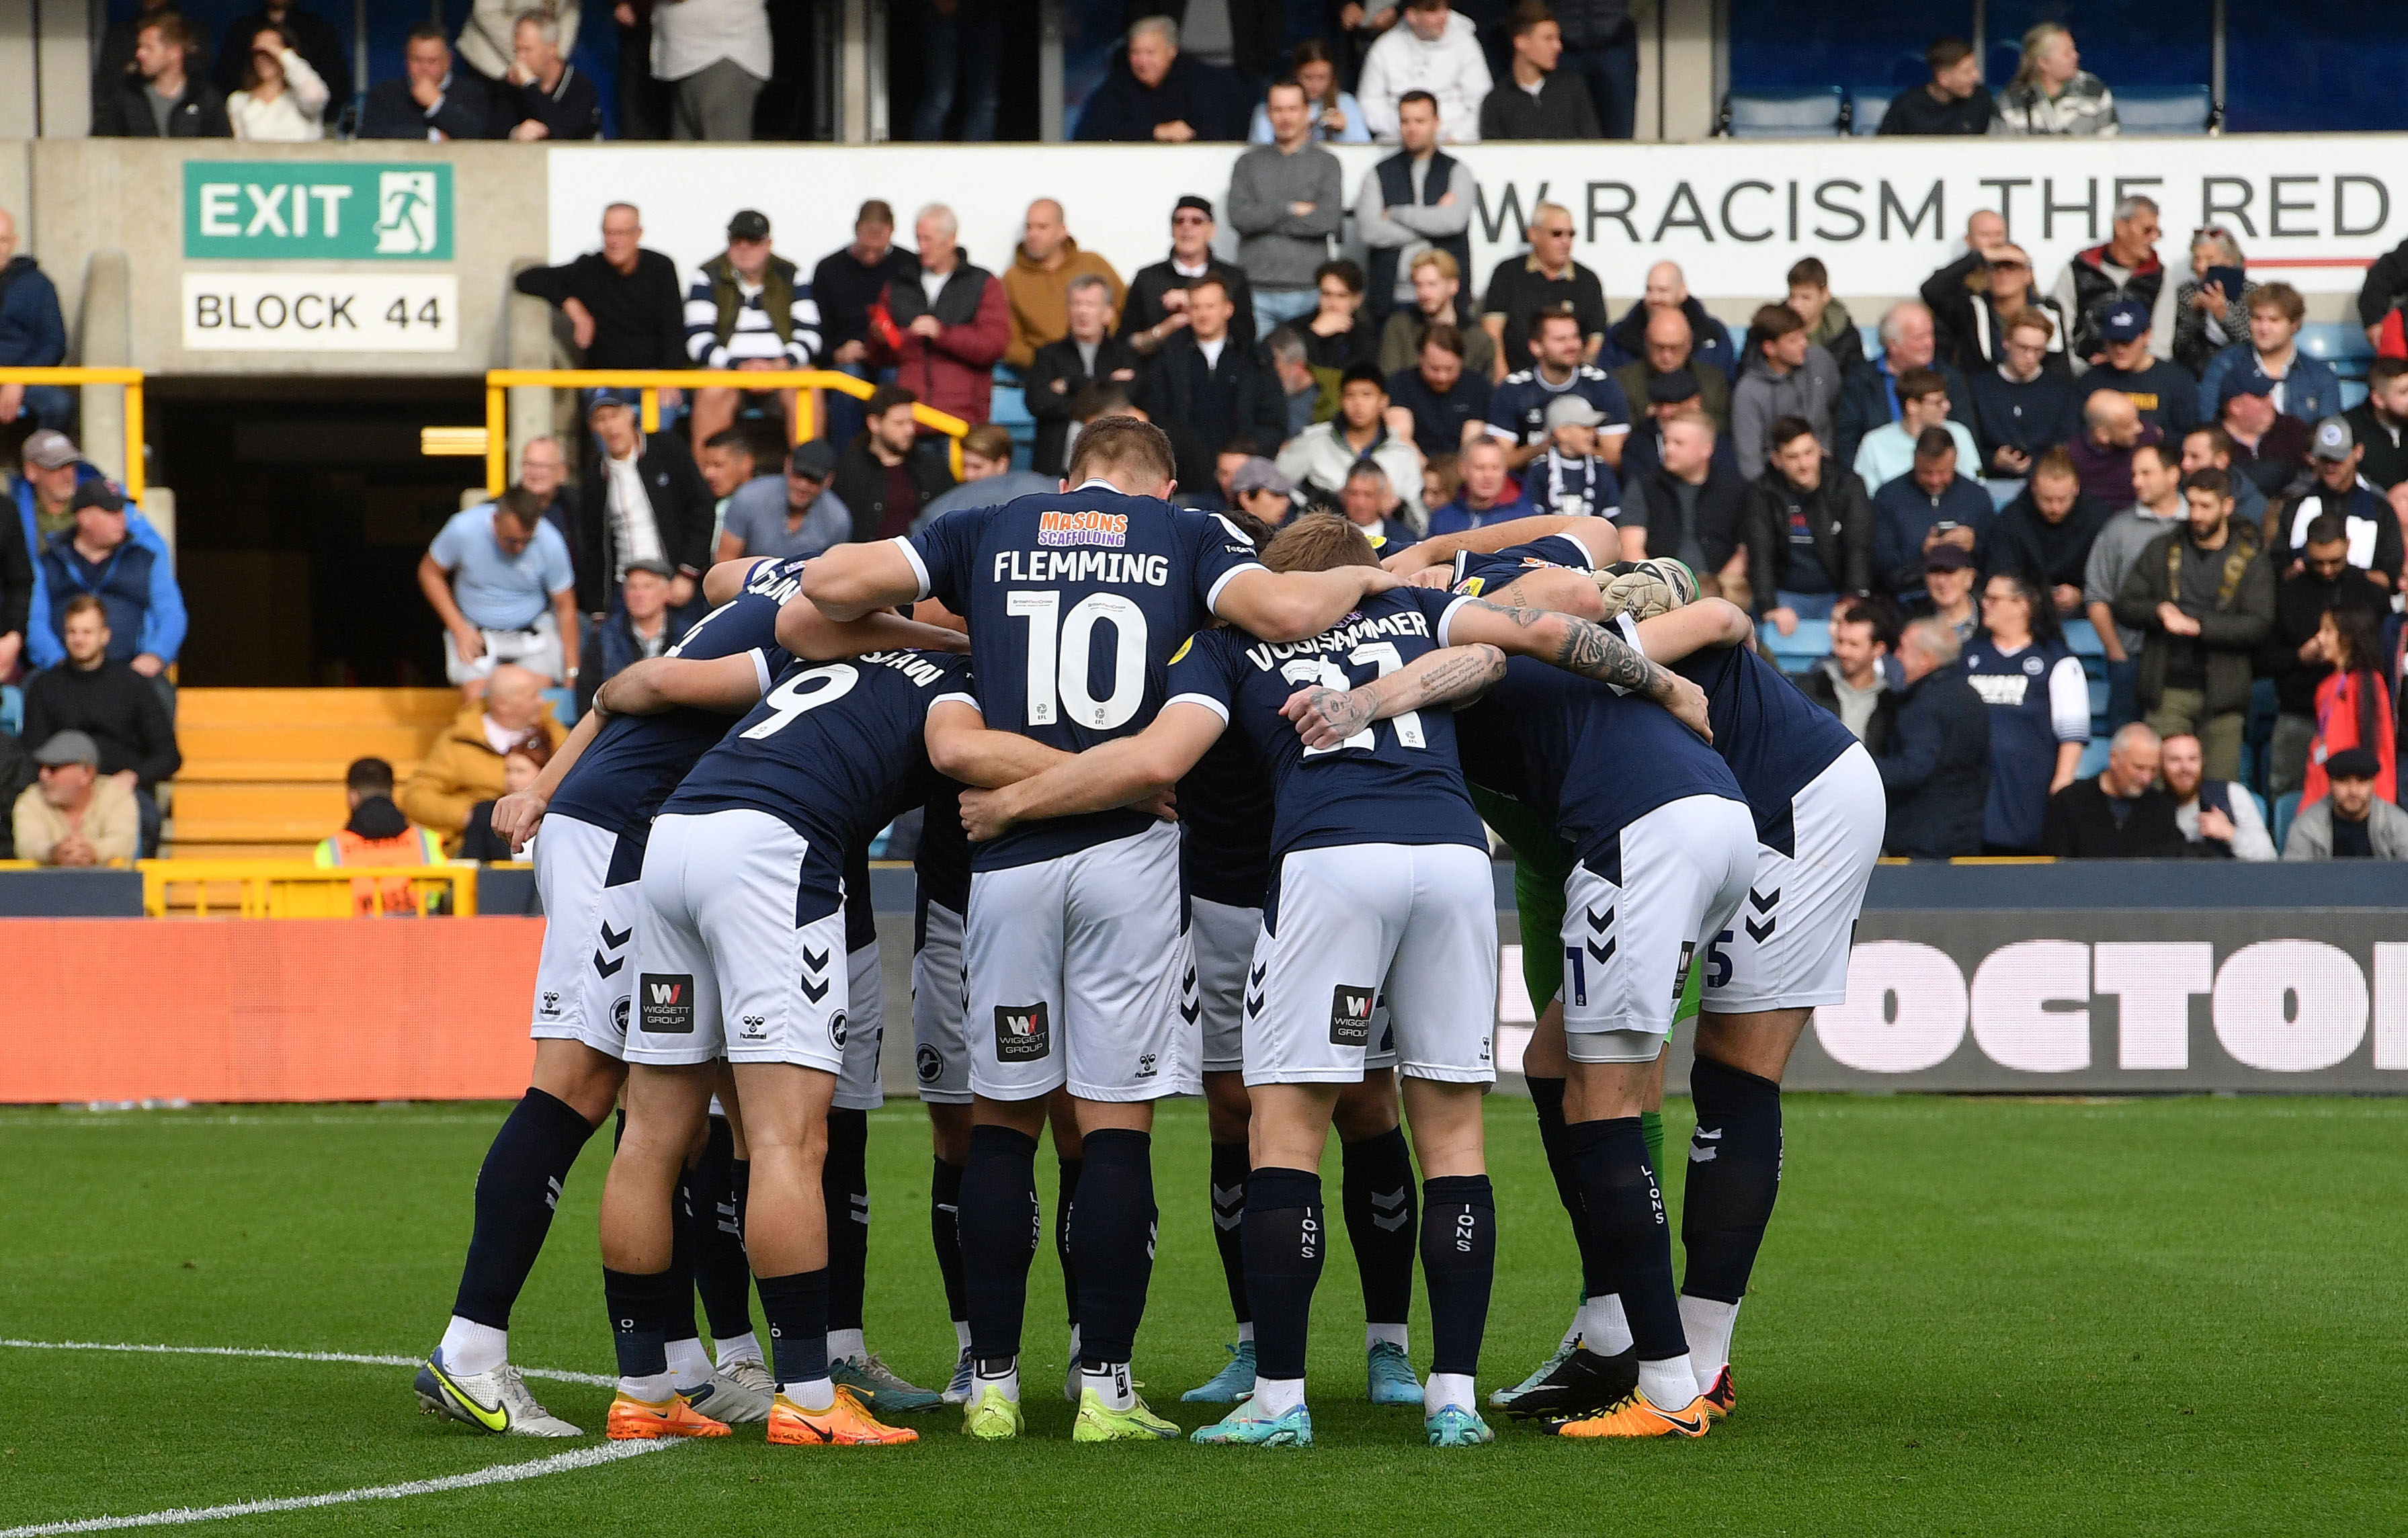 16-facts-about-millwall